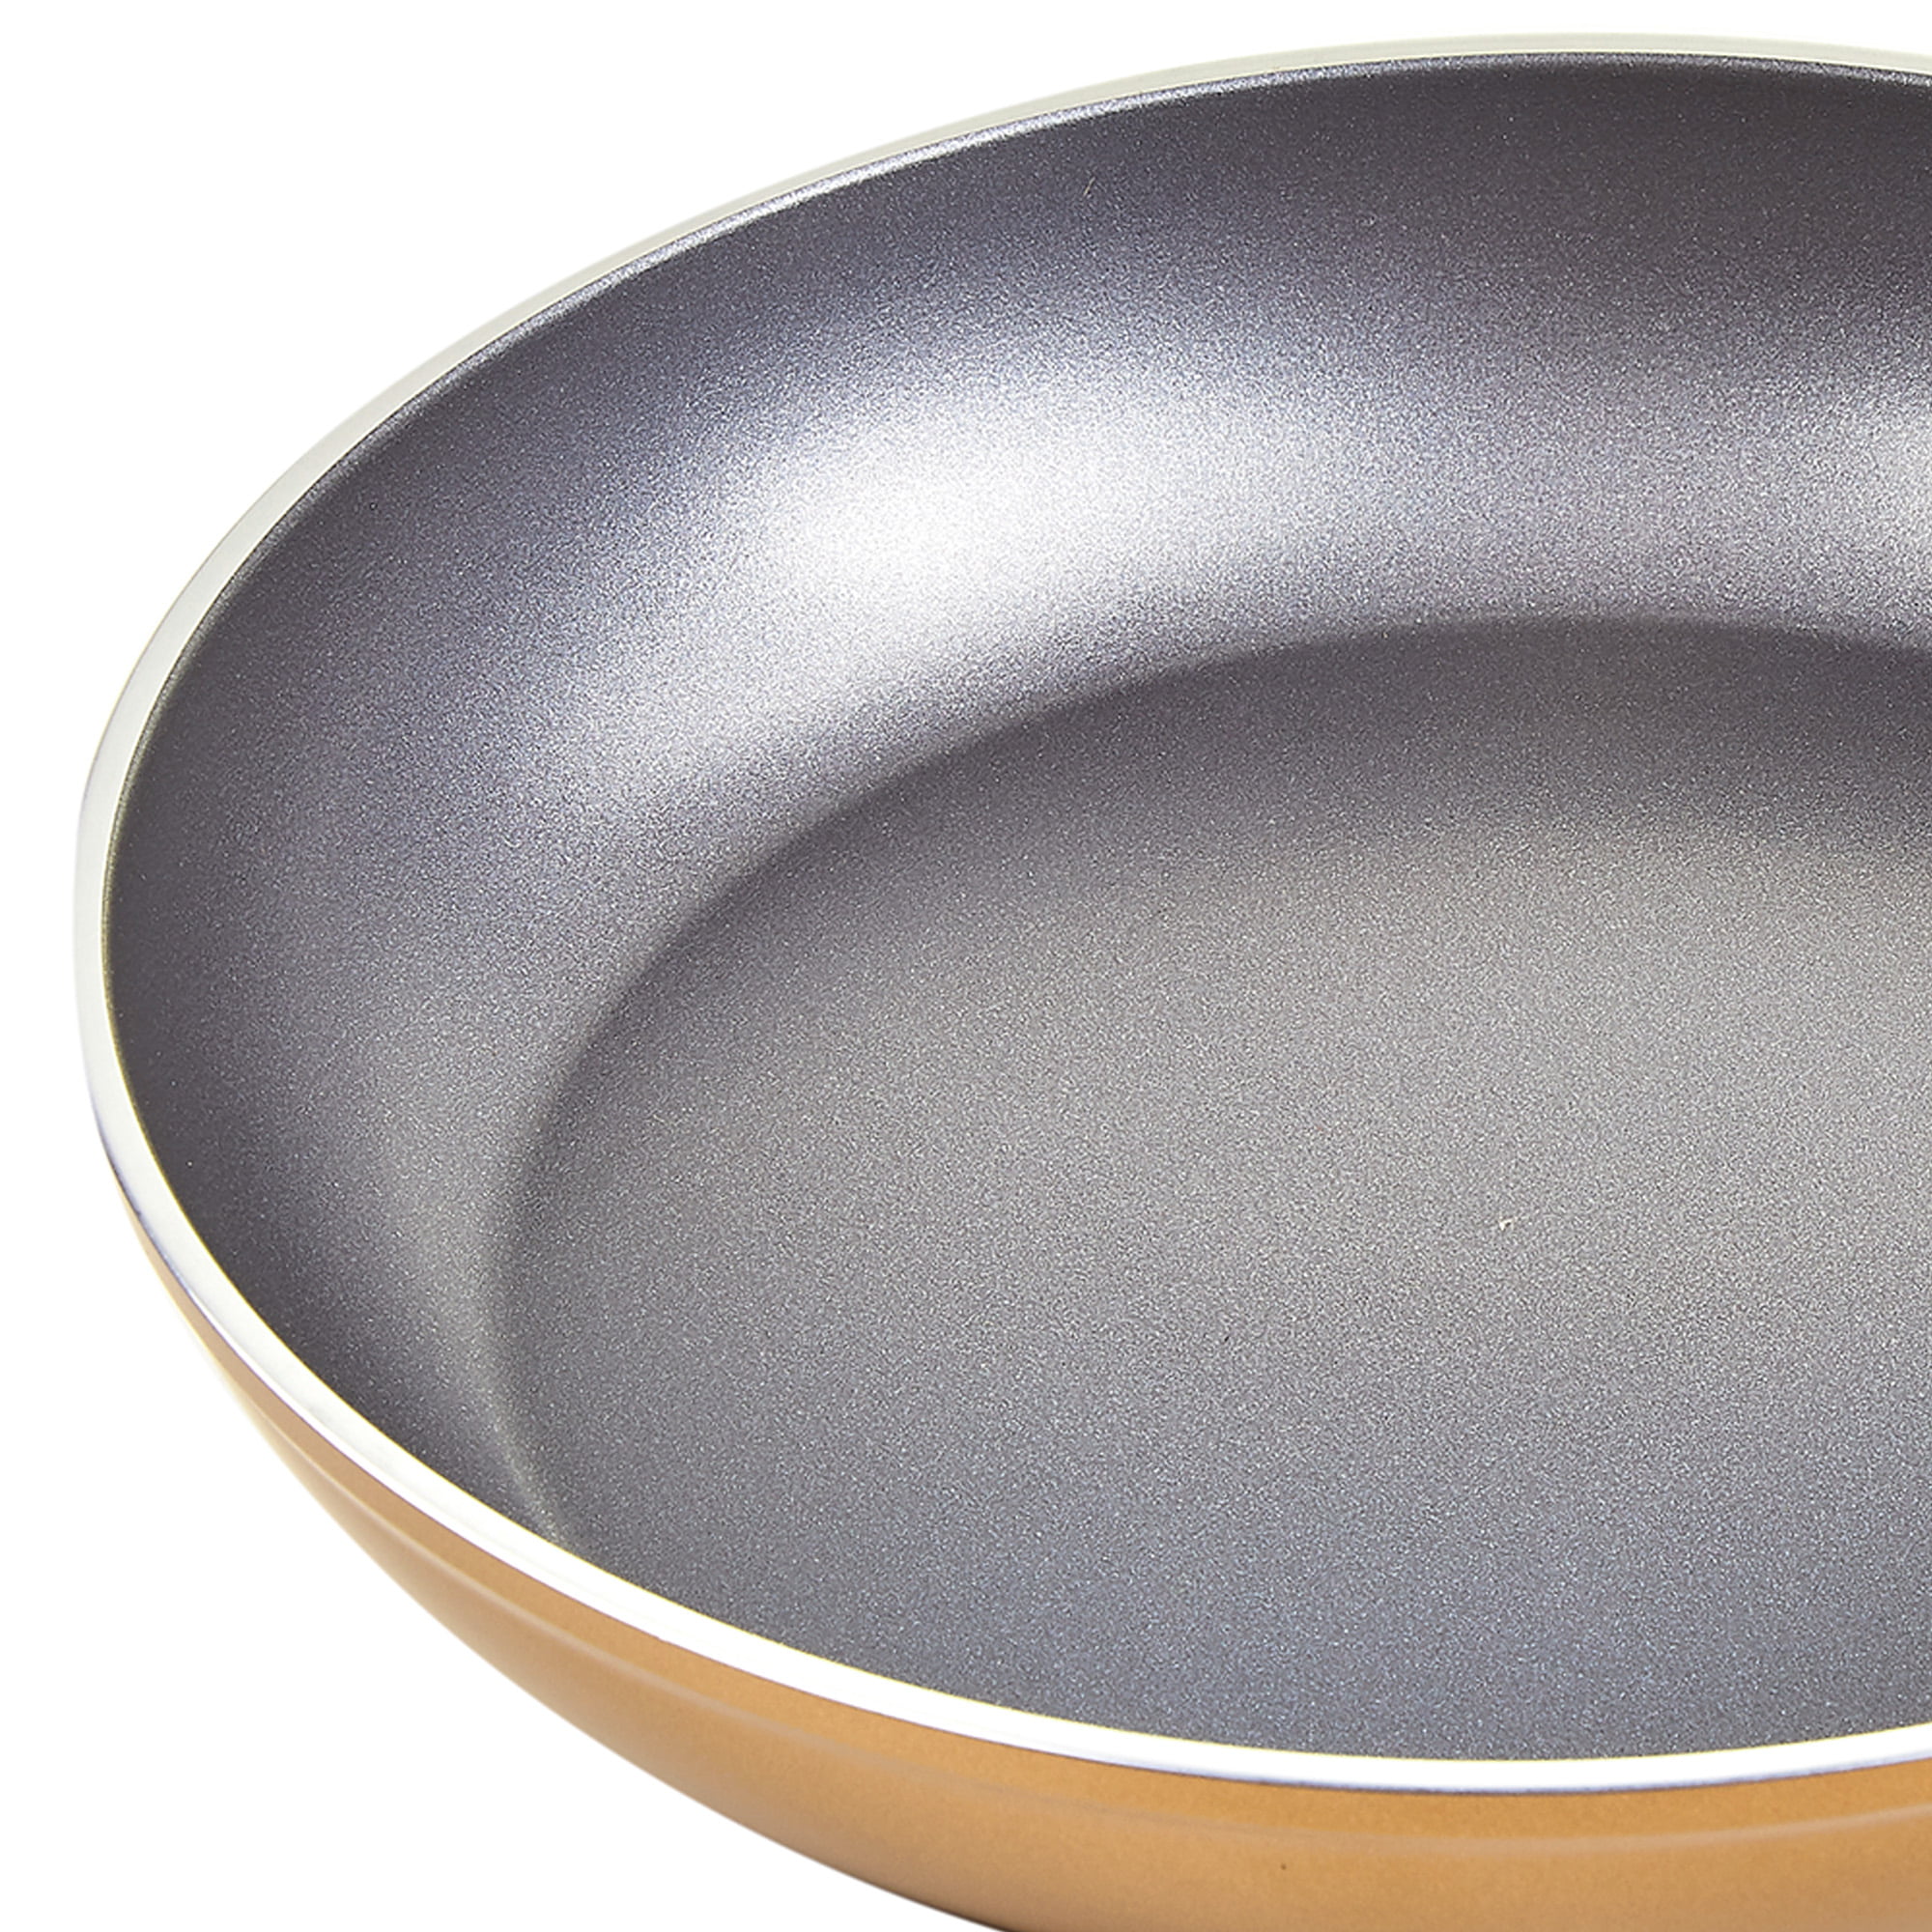 die cast aluminum non stick parini cookware five section divided frying pan  with copper ceramic coating as seen on tv